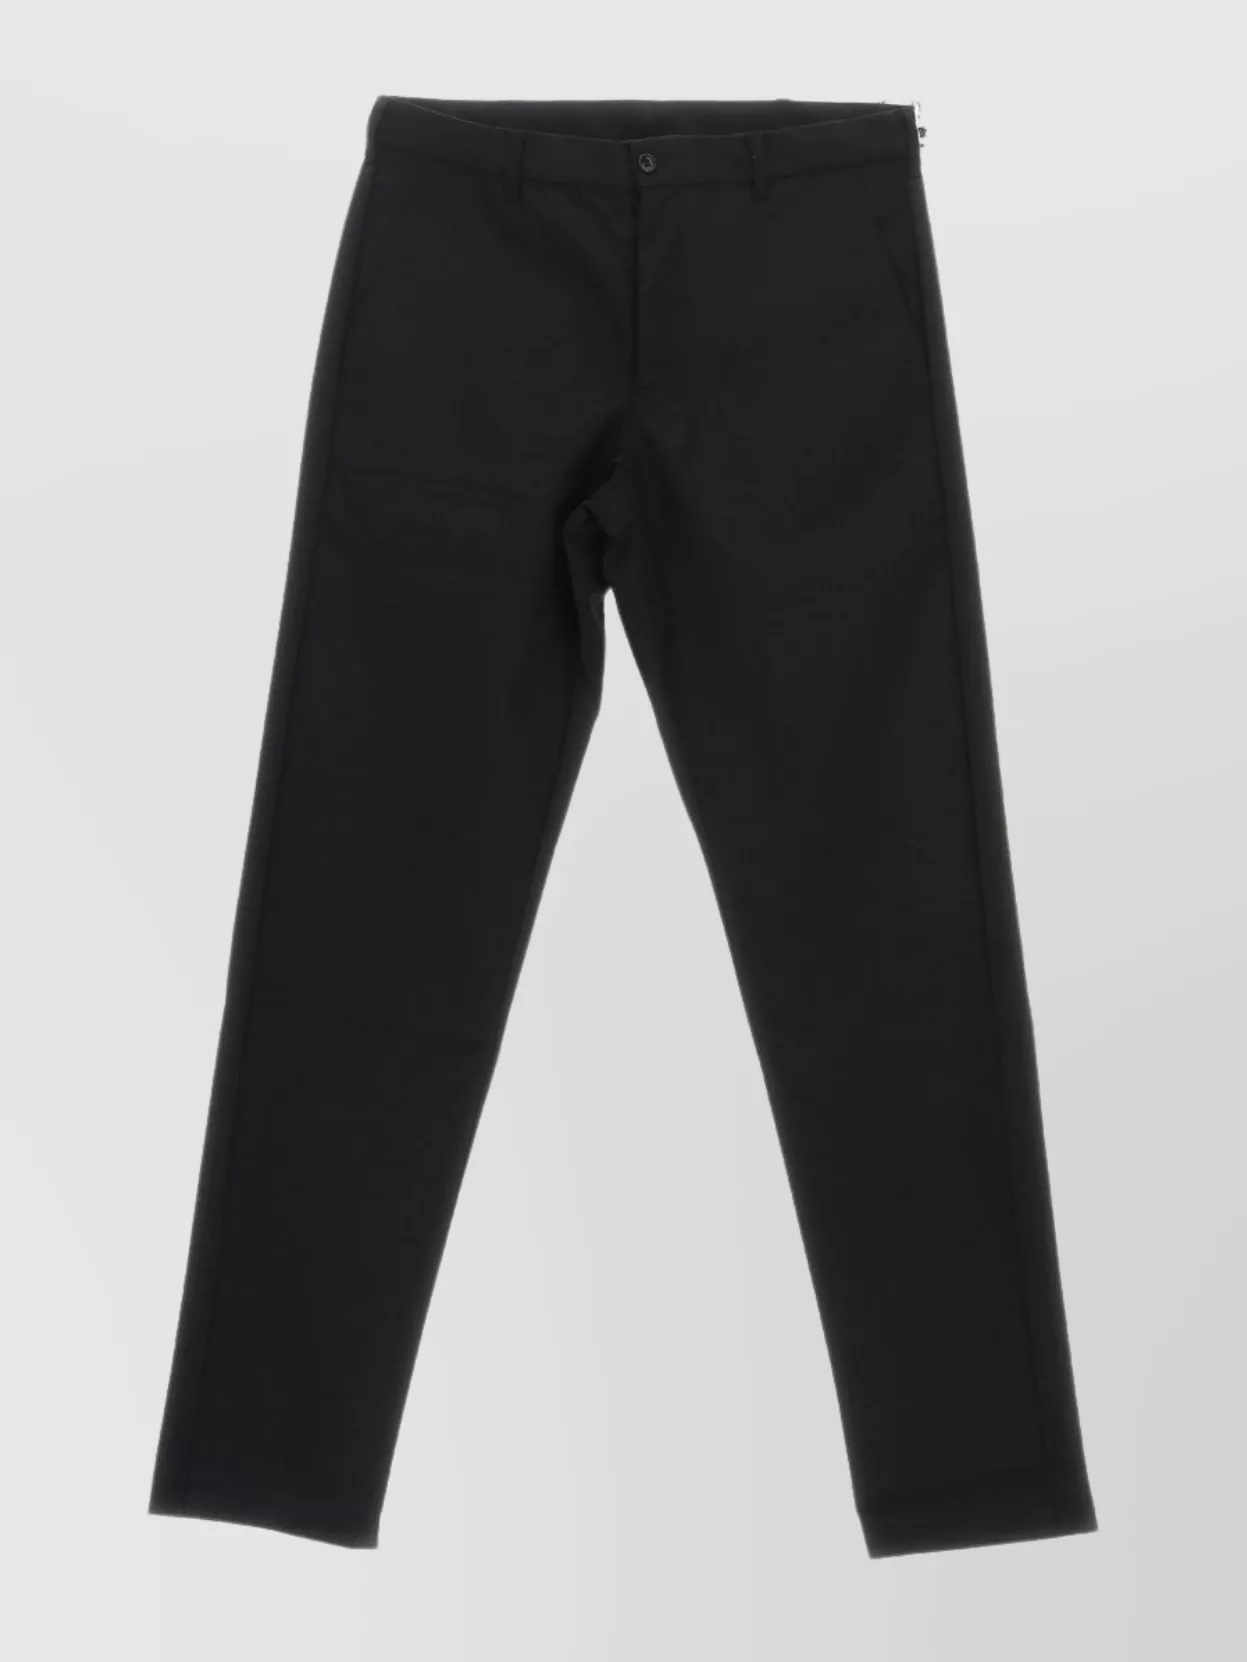 Shop Comme Des Garçons Tailored Pants With Belt Loops And Pockets